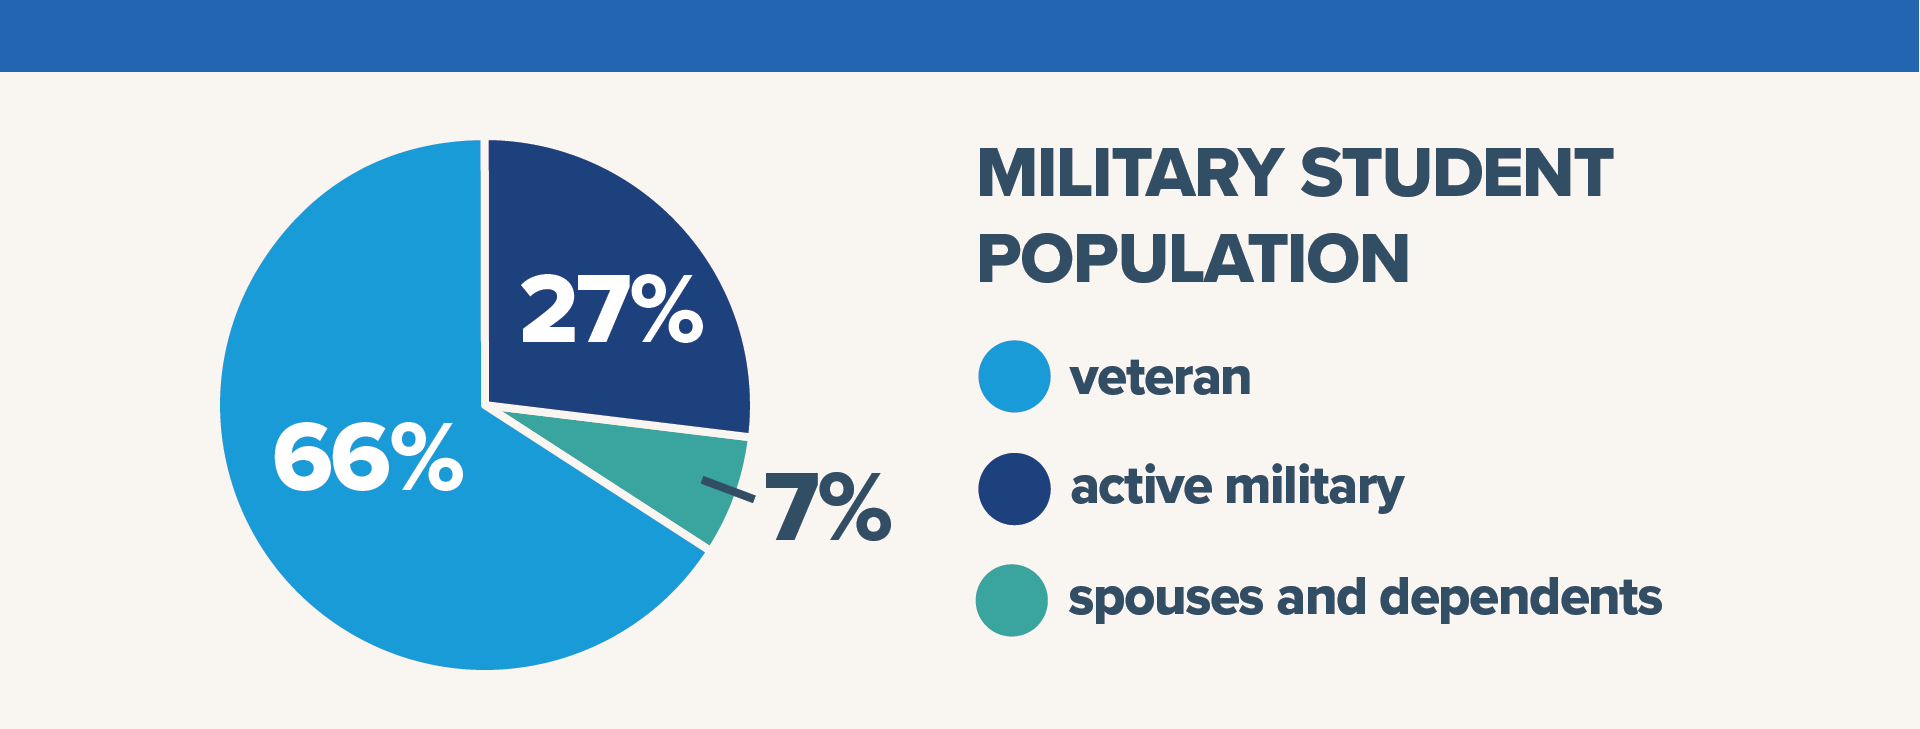 66% of our military students are veterans, 27% are active military, and 7% are spouses and dependents